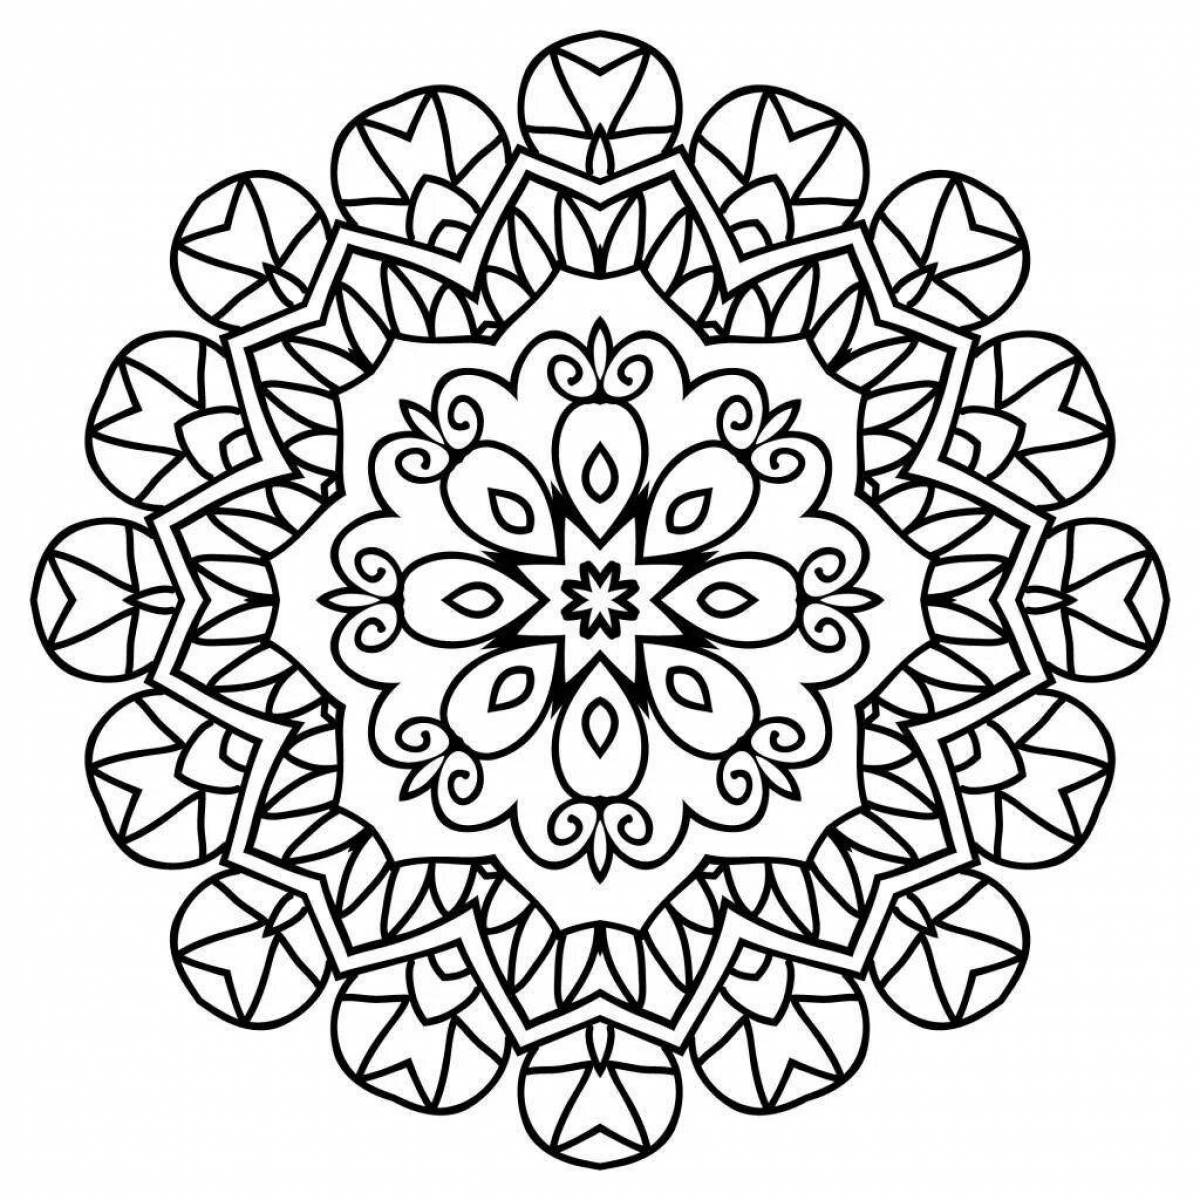 Glitter health and wellness mandala coloring page